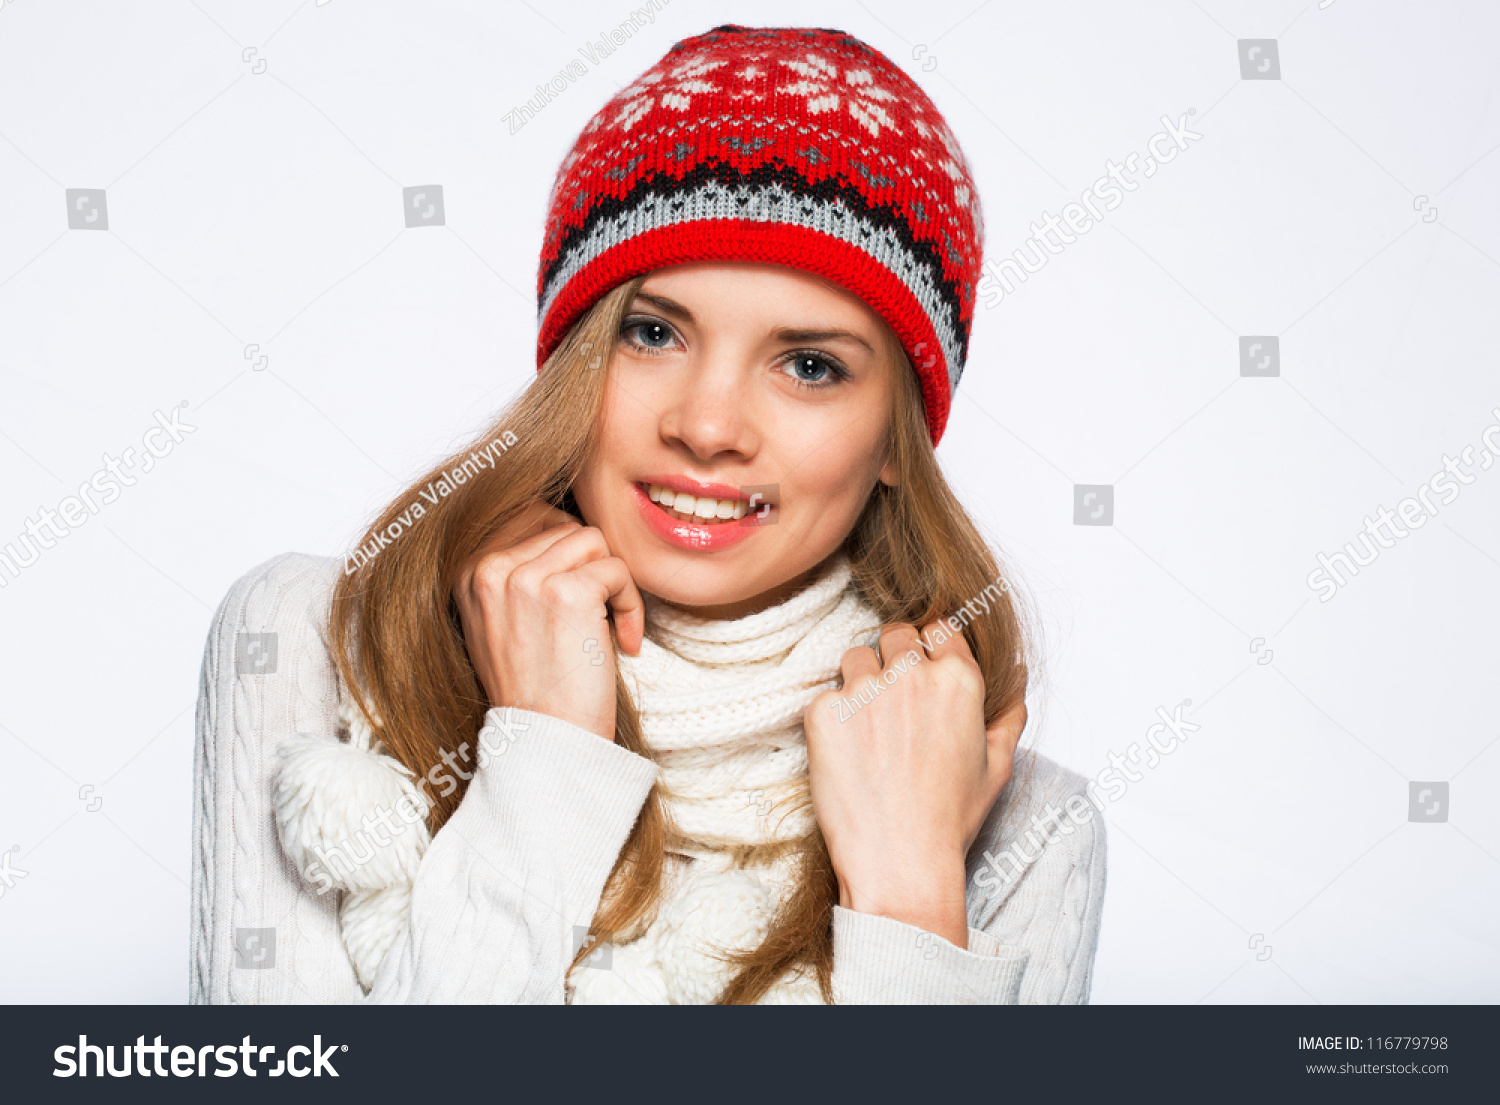 Young Girl In A Red Cap Isolated On White Stock Photo 116779798 ...